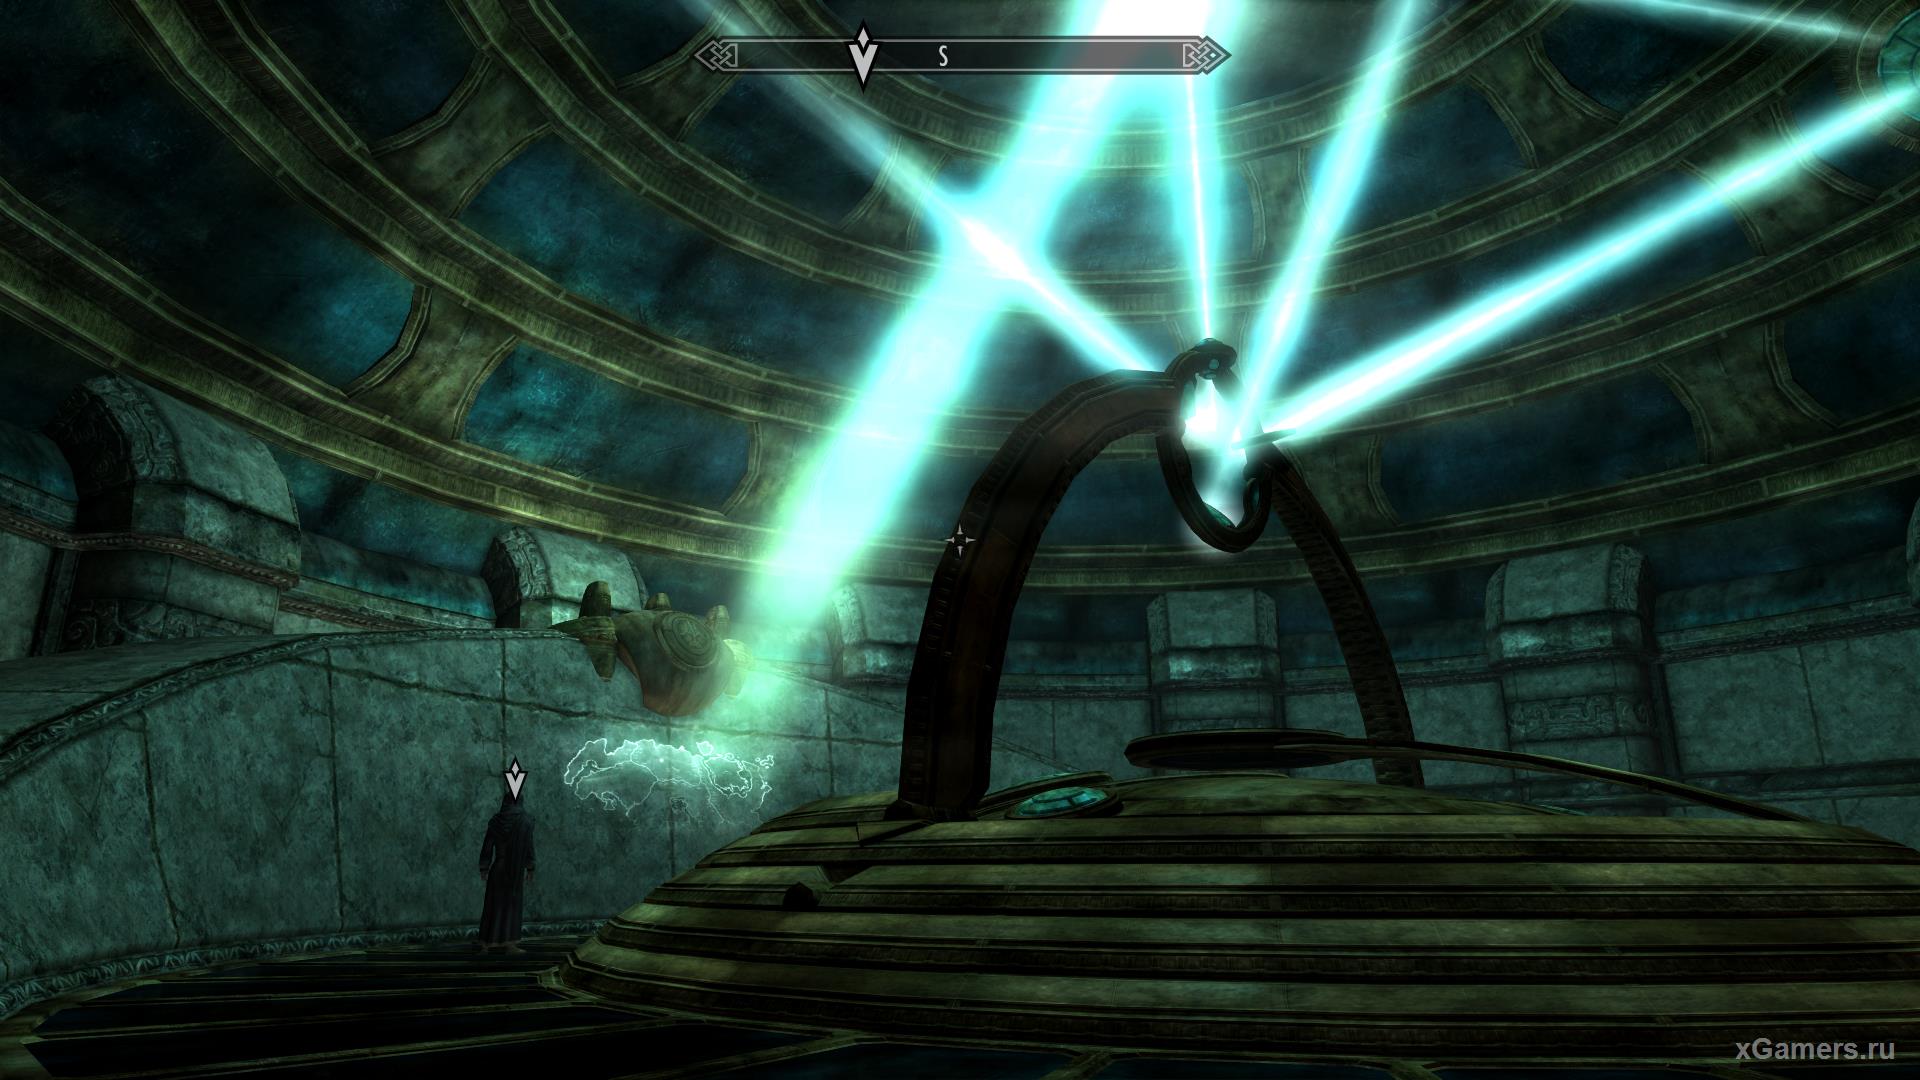 Skyrim "Discovery of the invisible" - how to focus the Ocuratorium, if the rays are not visible